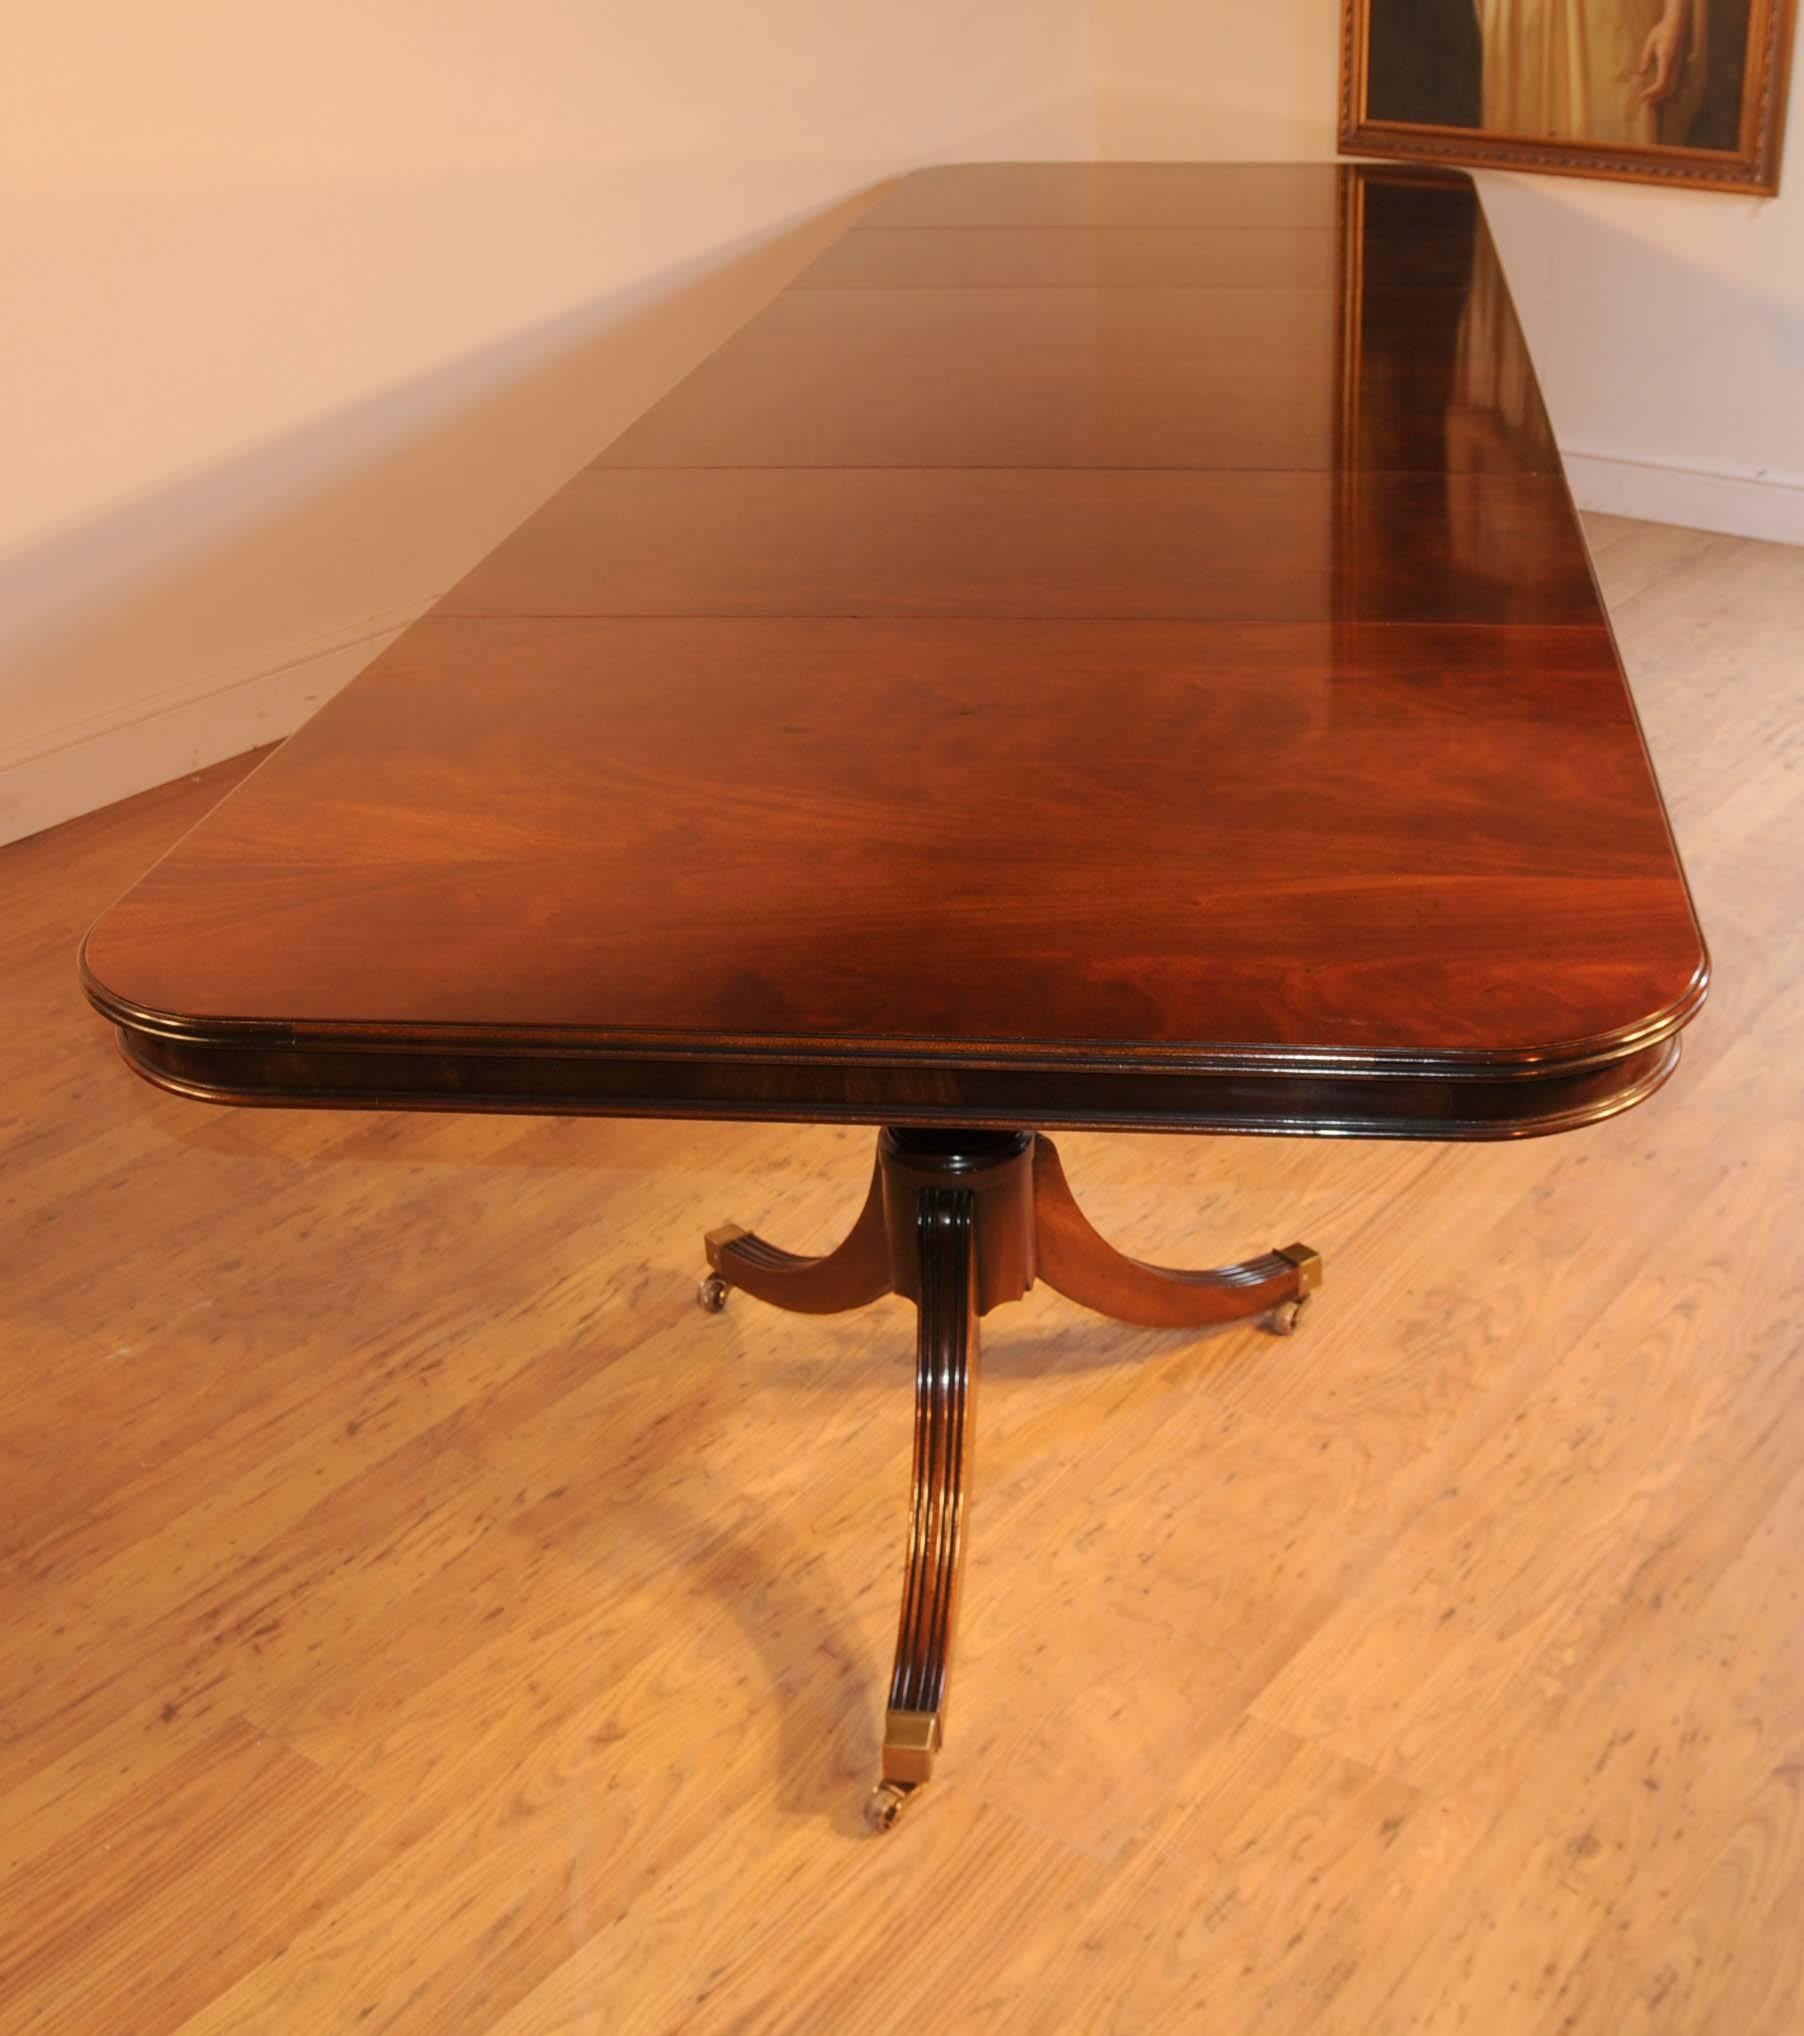 Gorgeous Regency style mahogany pedestal dining table.
Large table measures 14 feet when fully extended (4.2 metres).
Seats 8-14 people comfortably when fully extended.
Table has three pedestal sections and two leaves so various size